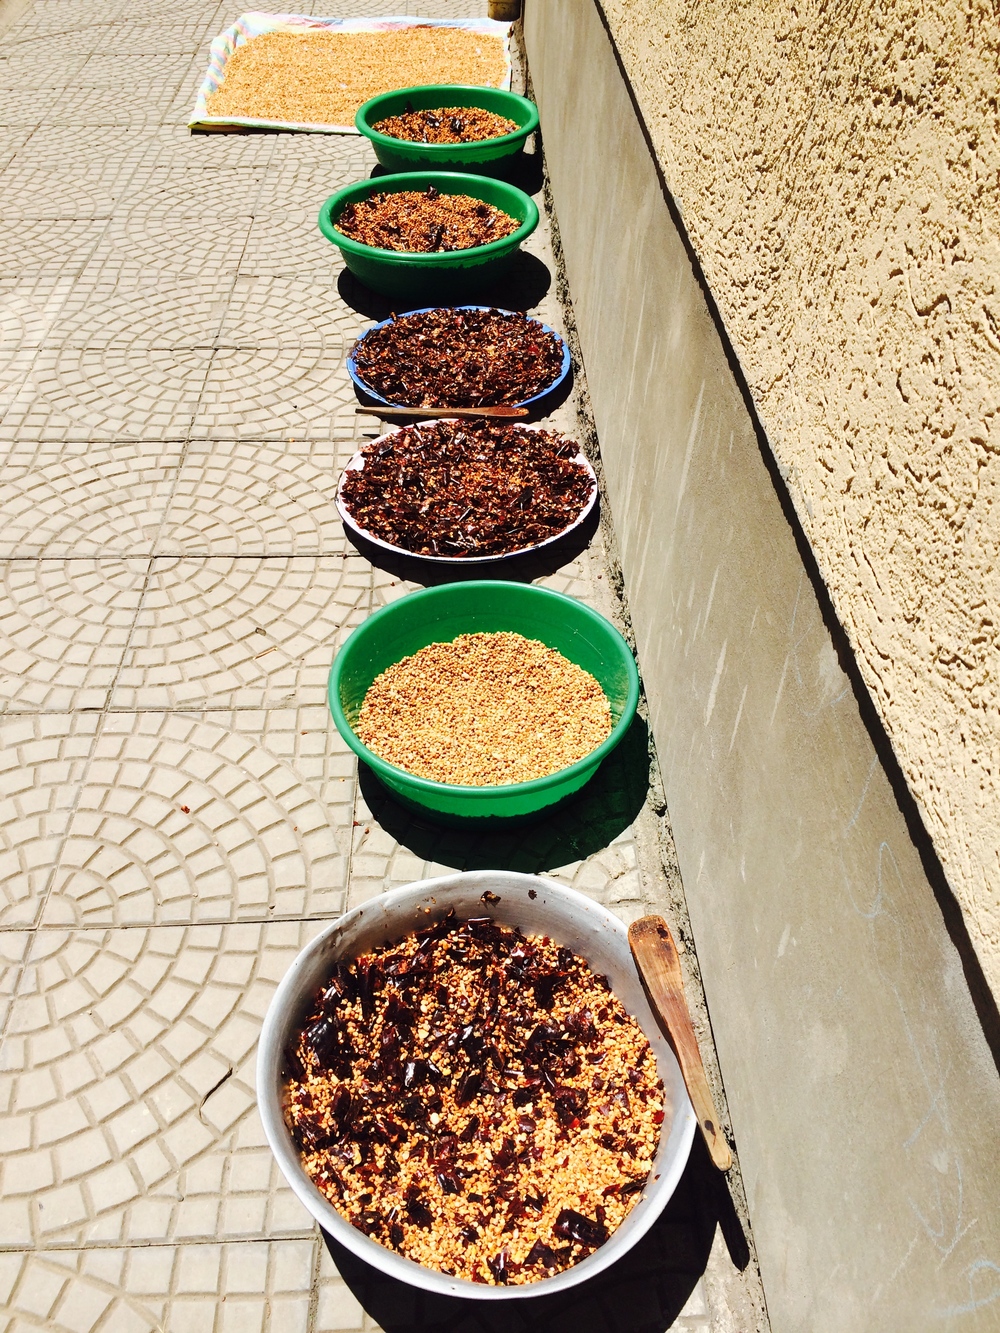 Shiro (Chickpea Stew) and Berbere Peppers Drying